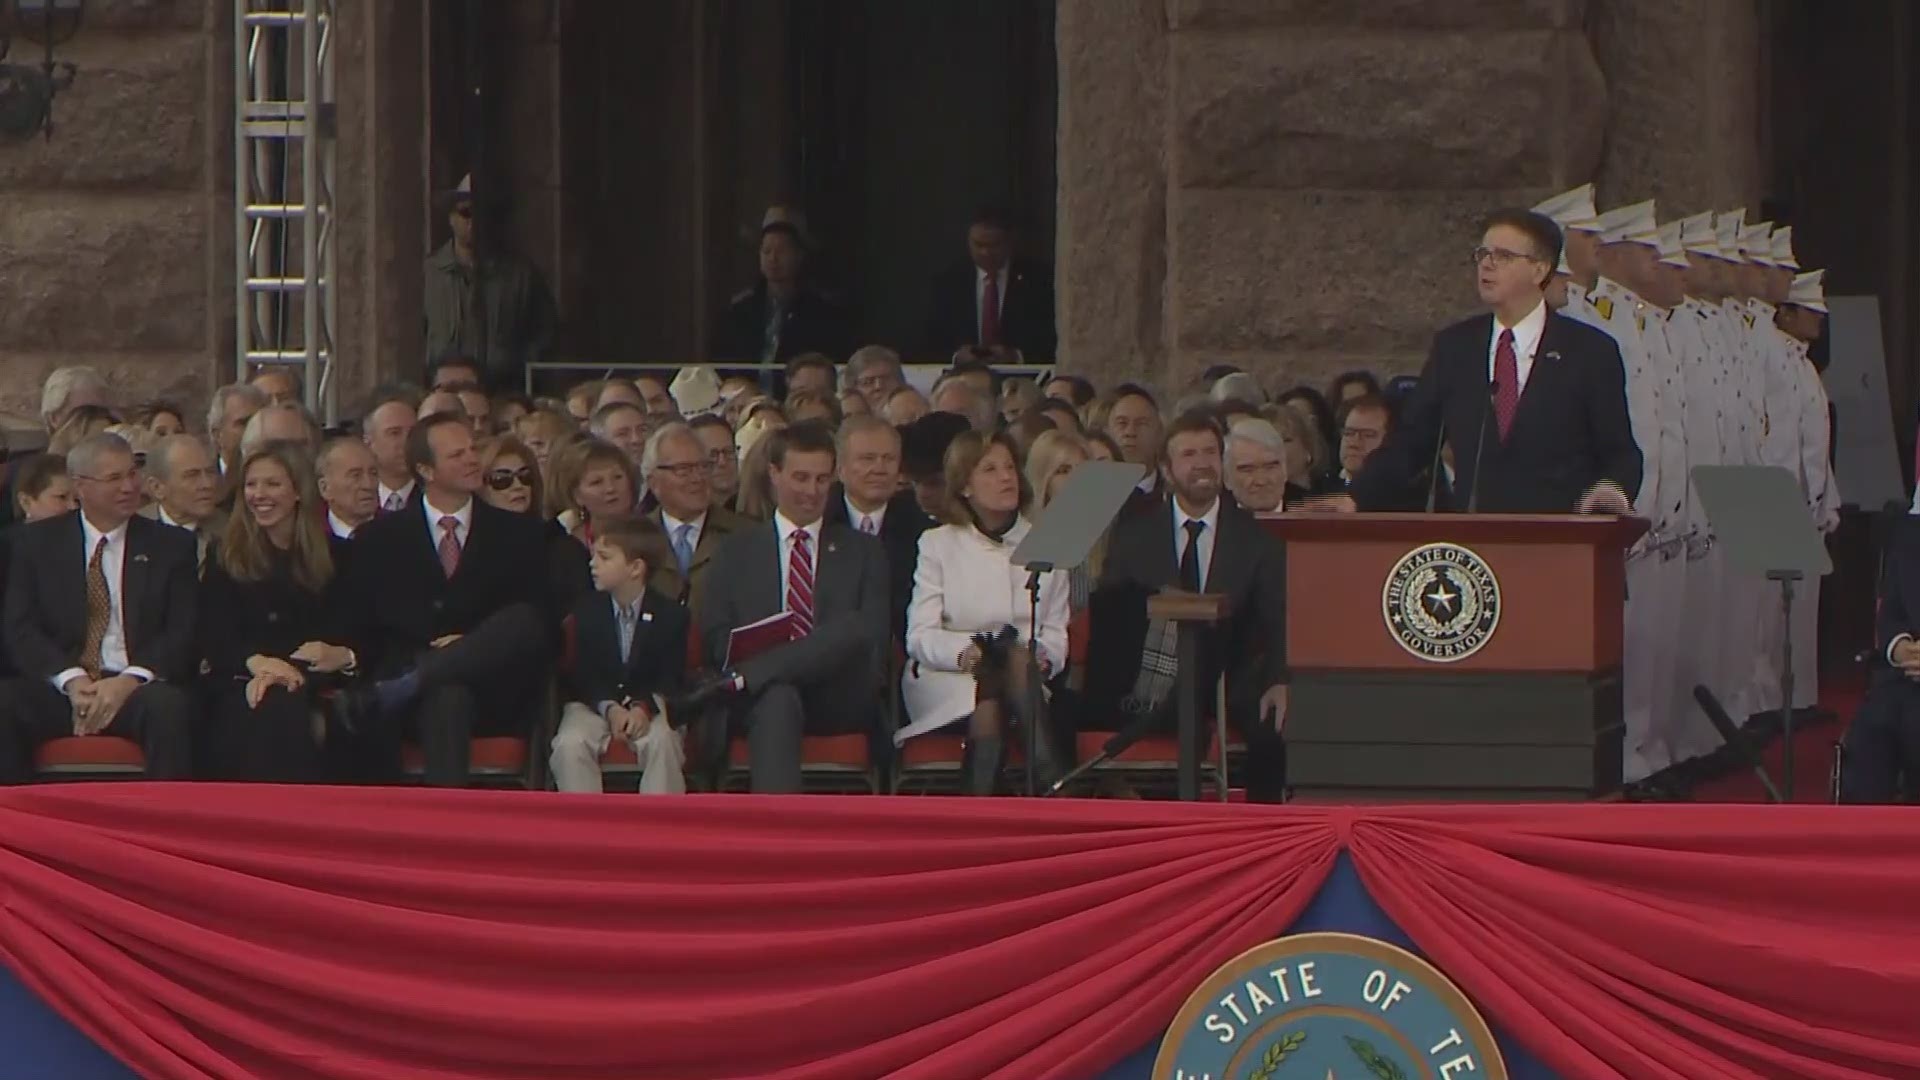 At the inauguration for Texas Gov. Greg Abbott and Lt. Gov. Dan Patrick, Chuck Norris gave some "extra security."